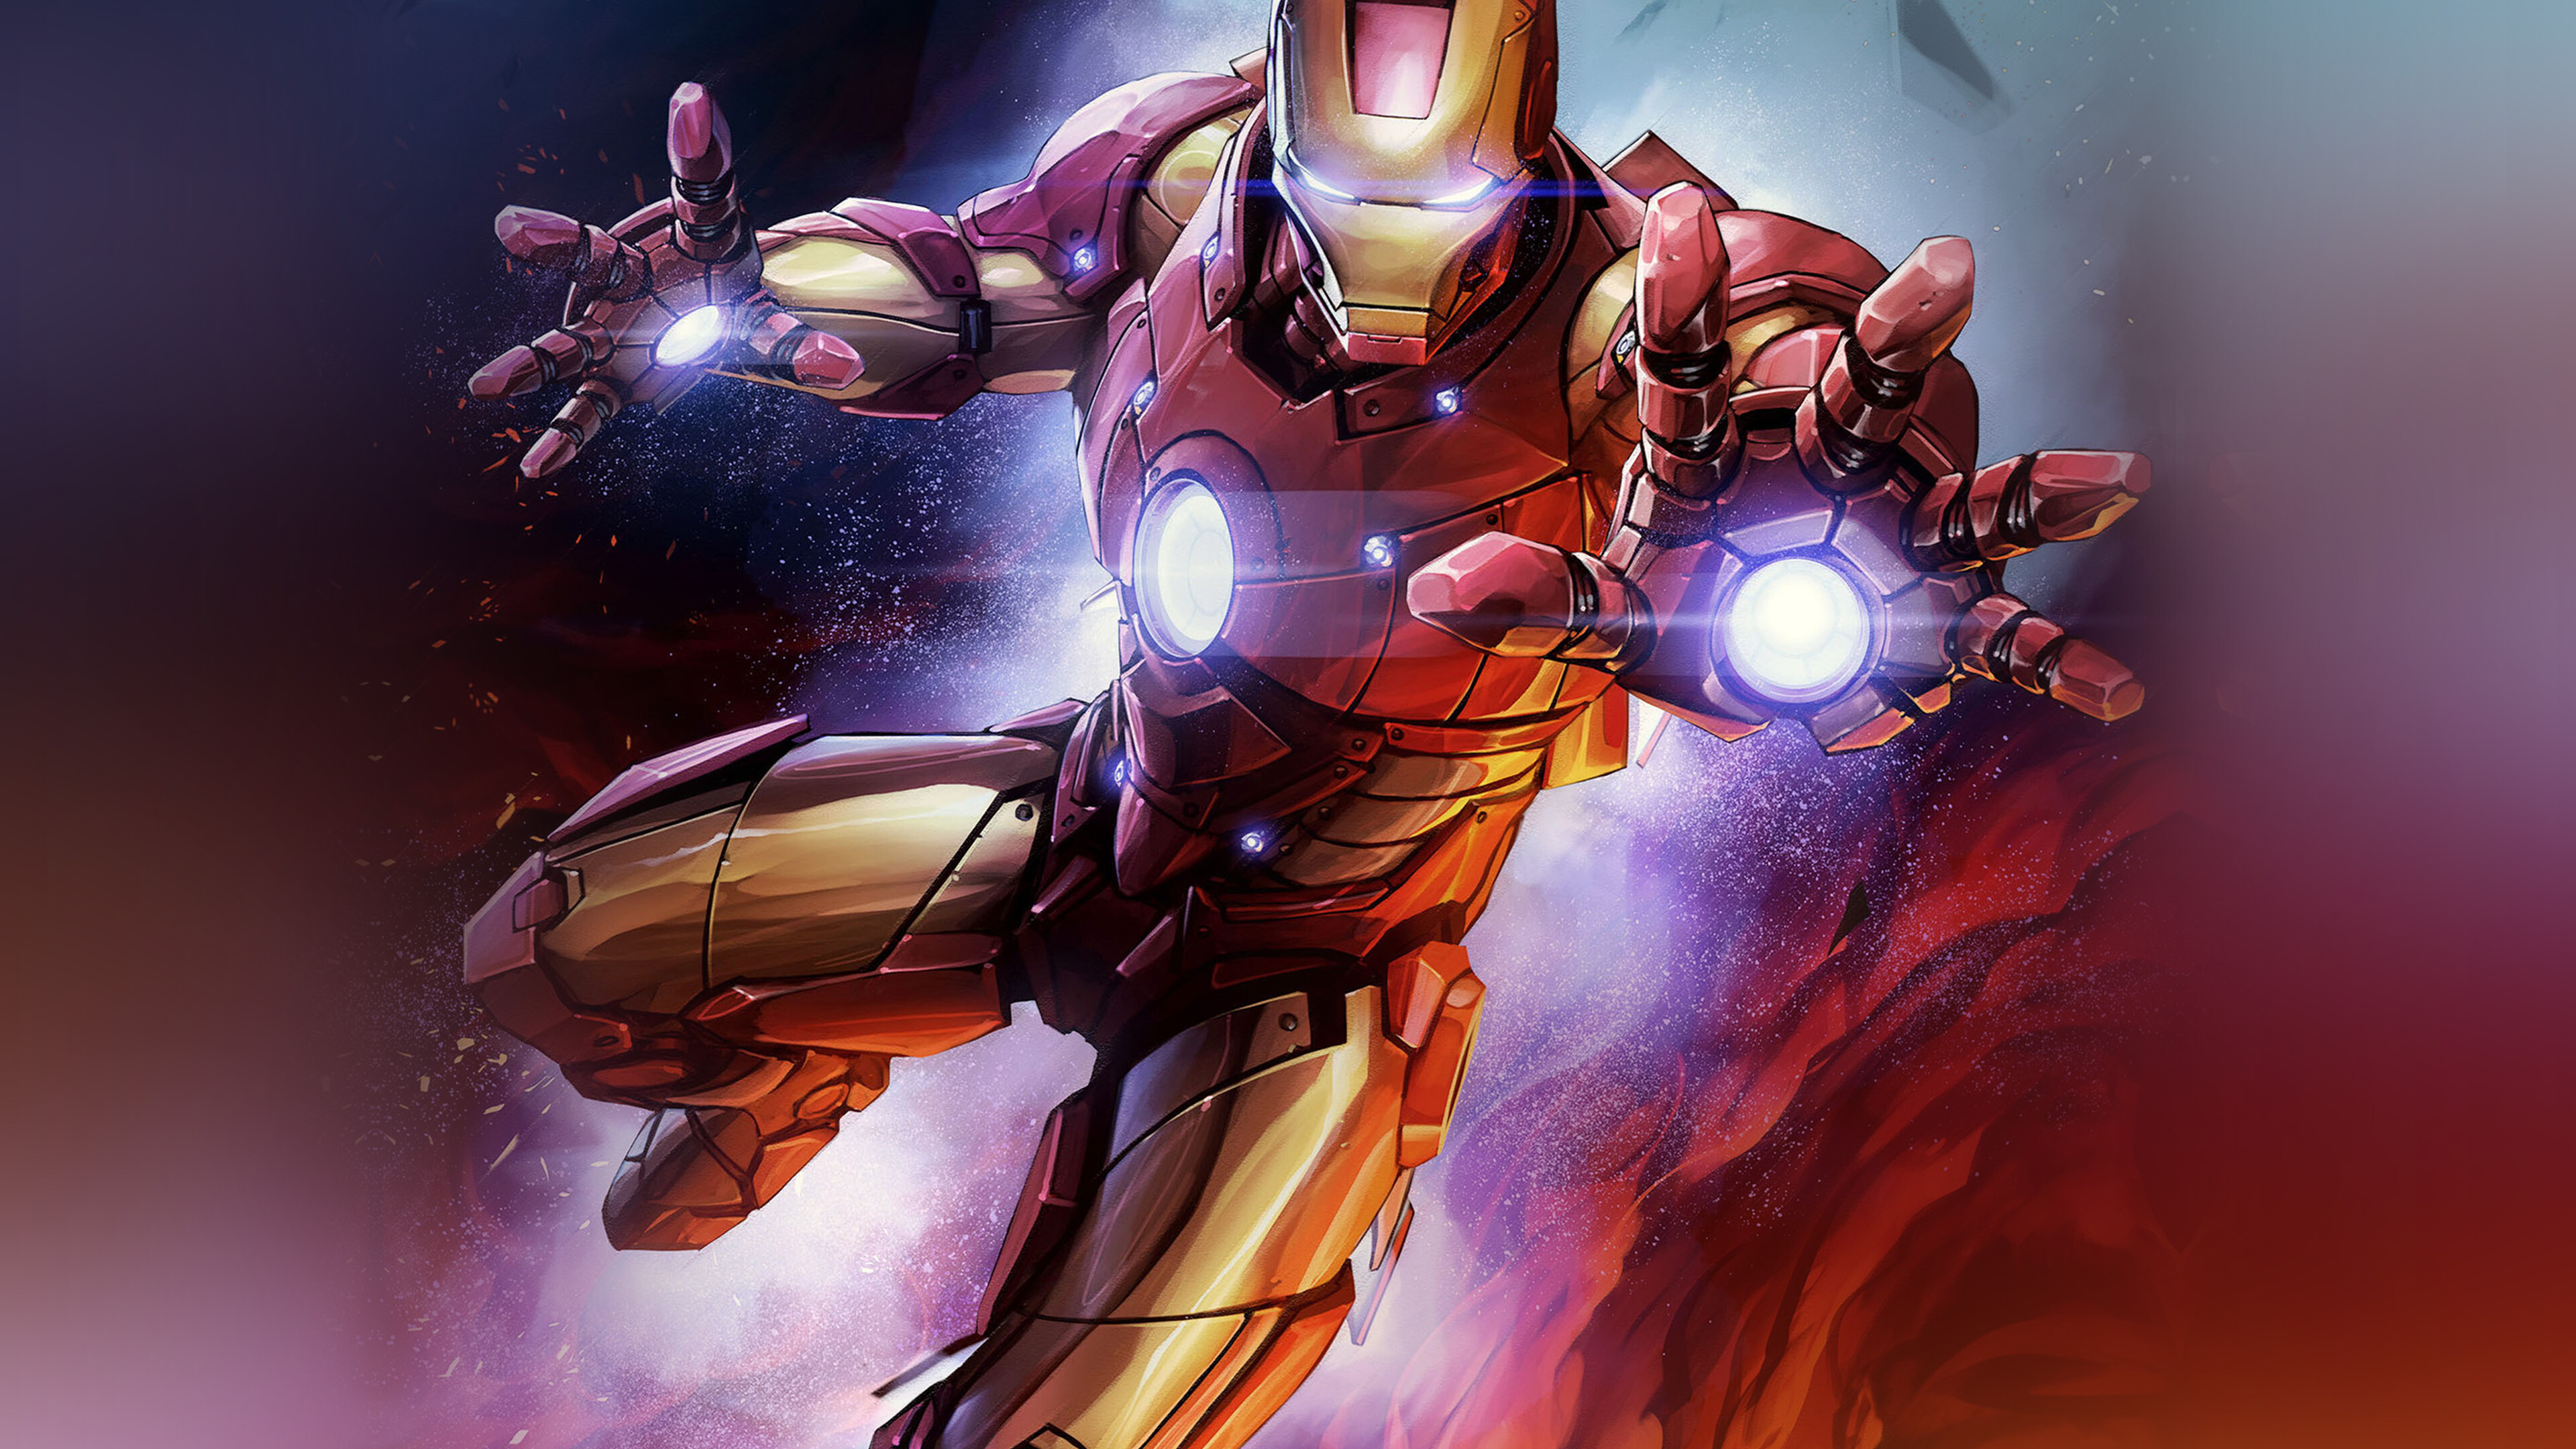 Marvel: Iron Man, made his first appearance in Tales of Suspense №39. 3840x2160 4K Background.